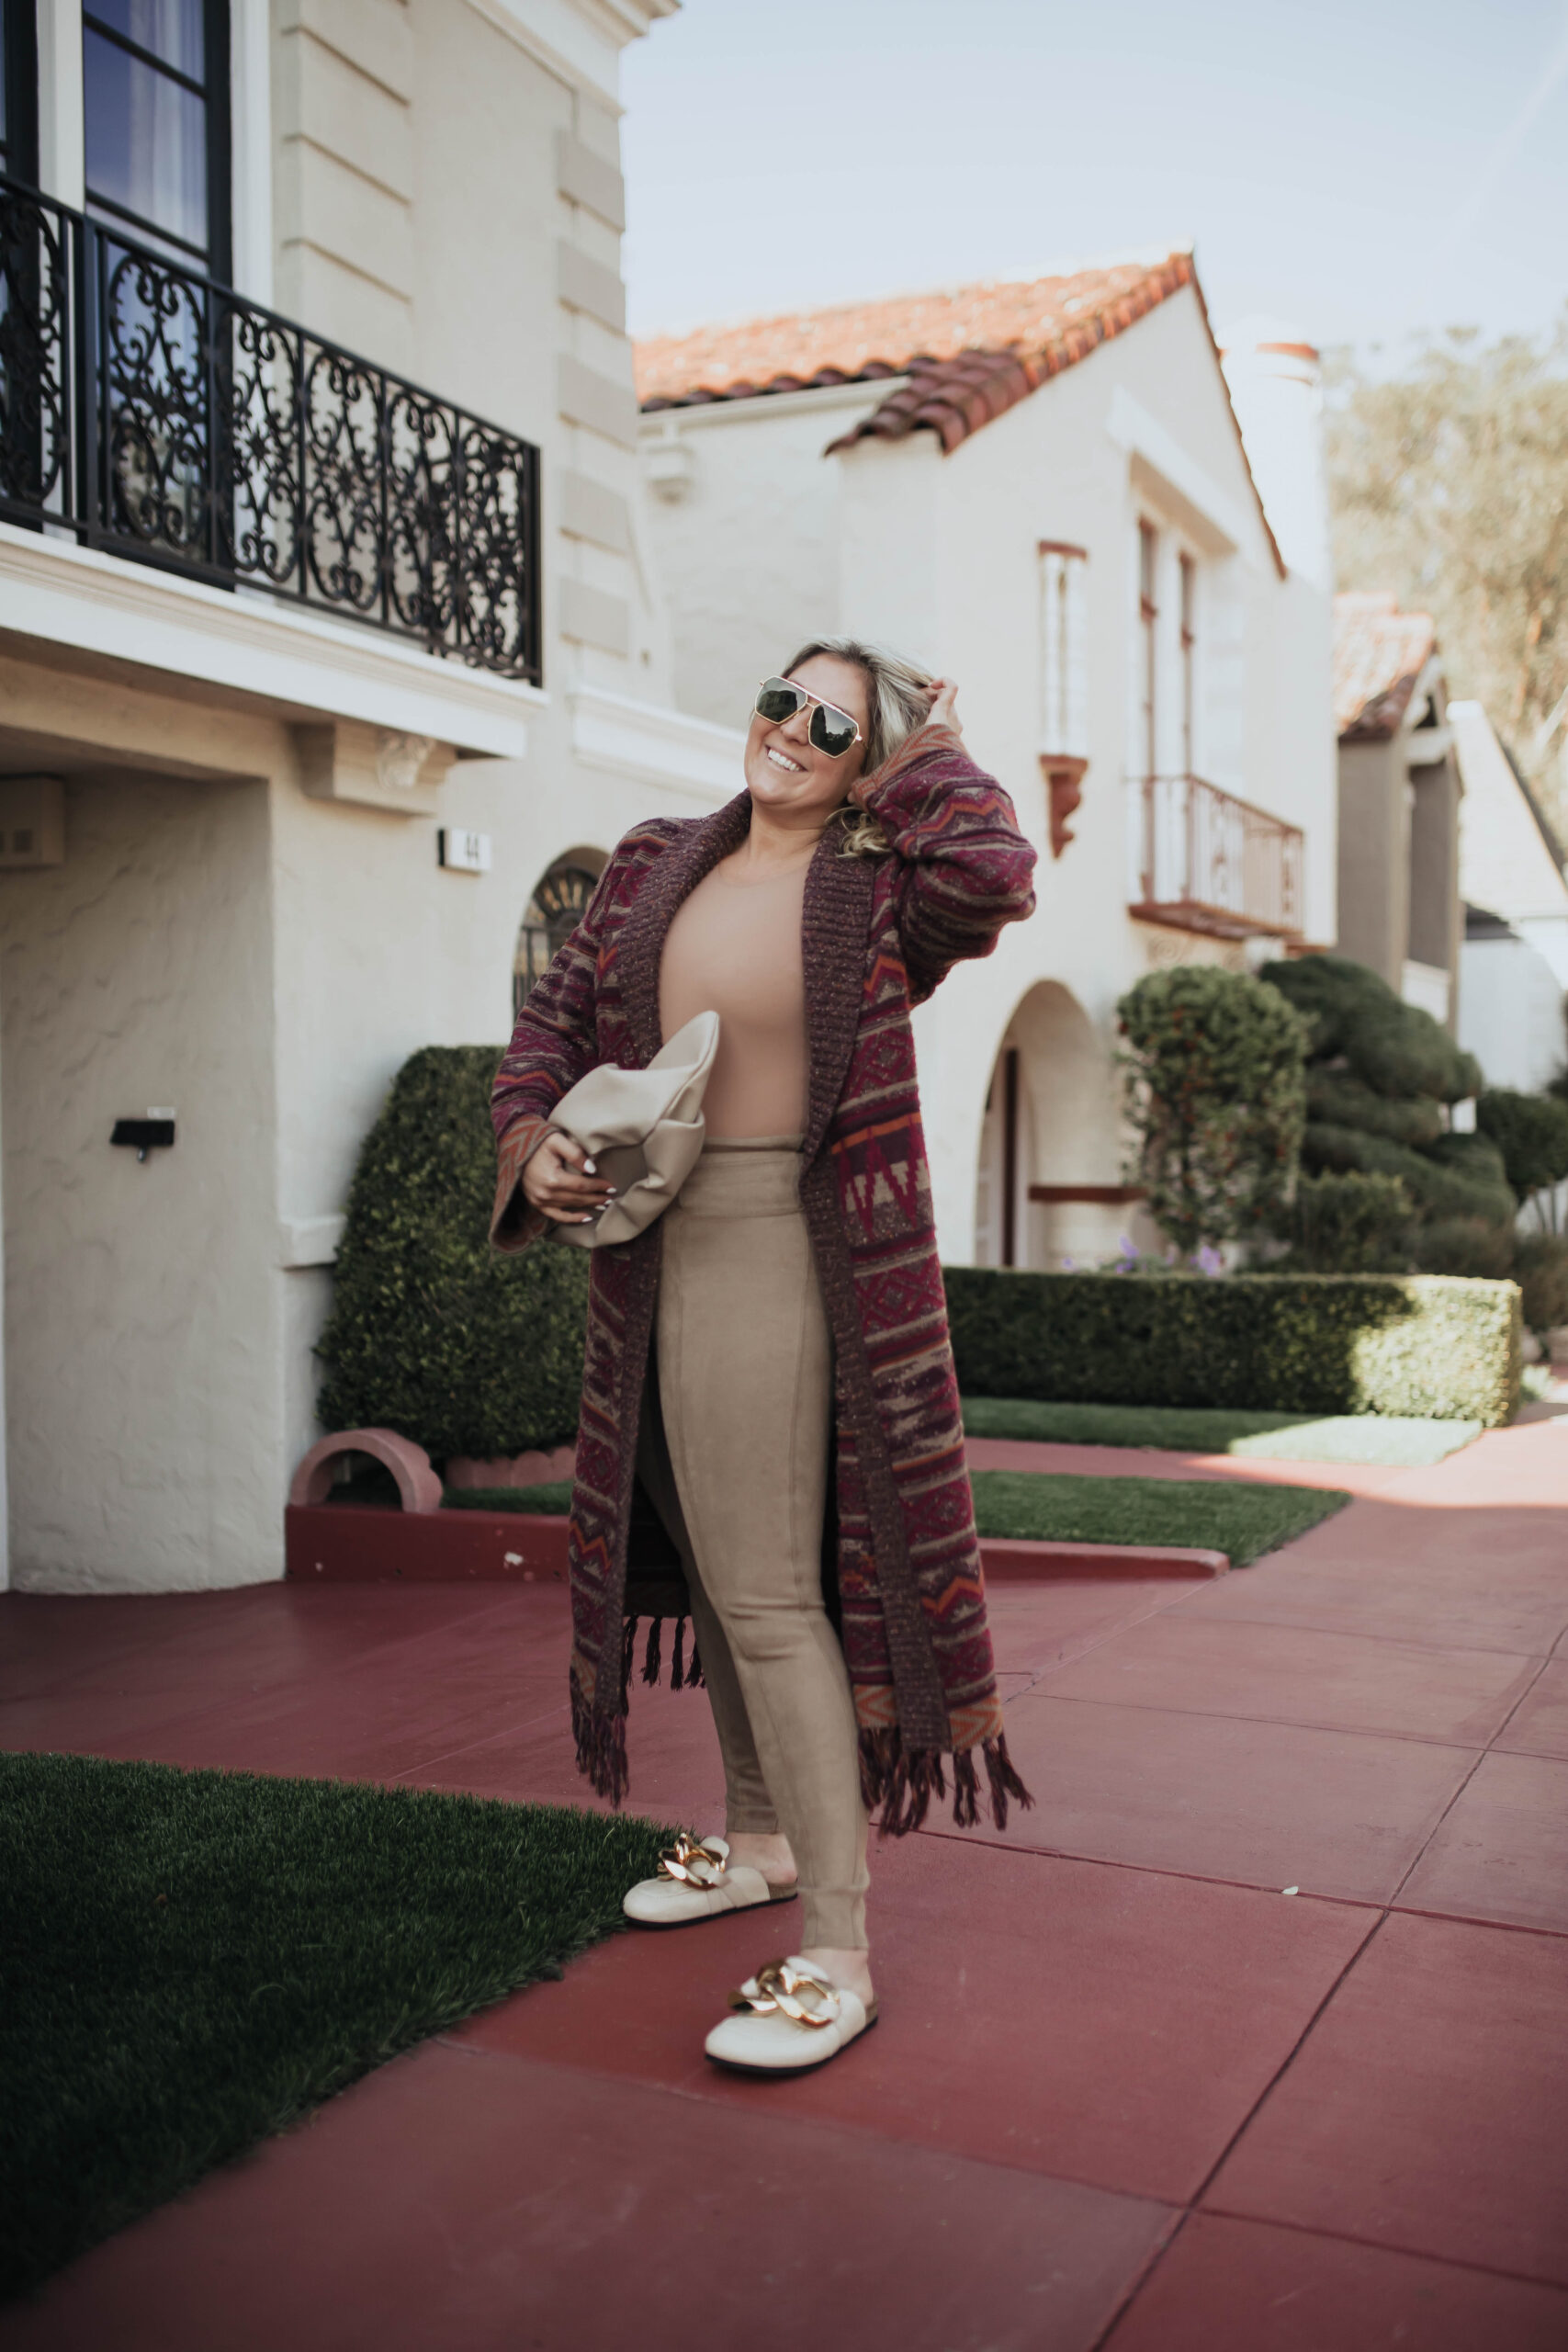 San Francisco fashion blogger KatWalkSF wears the House of Harlow Guinevere Duster with the Senreve Conetti Bag